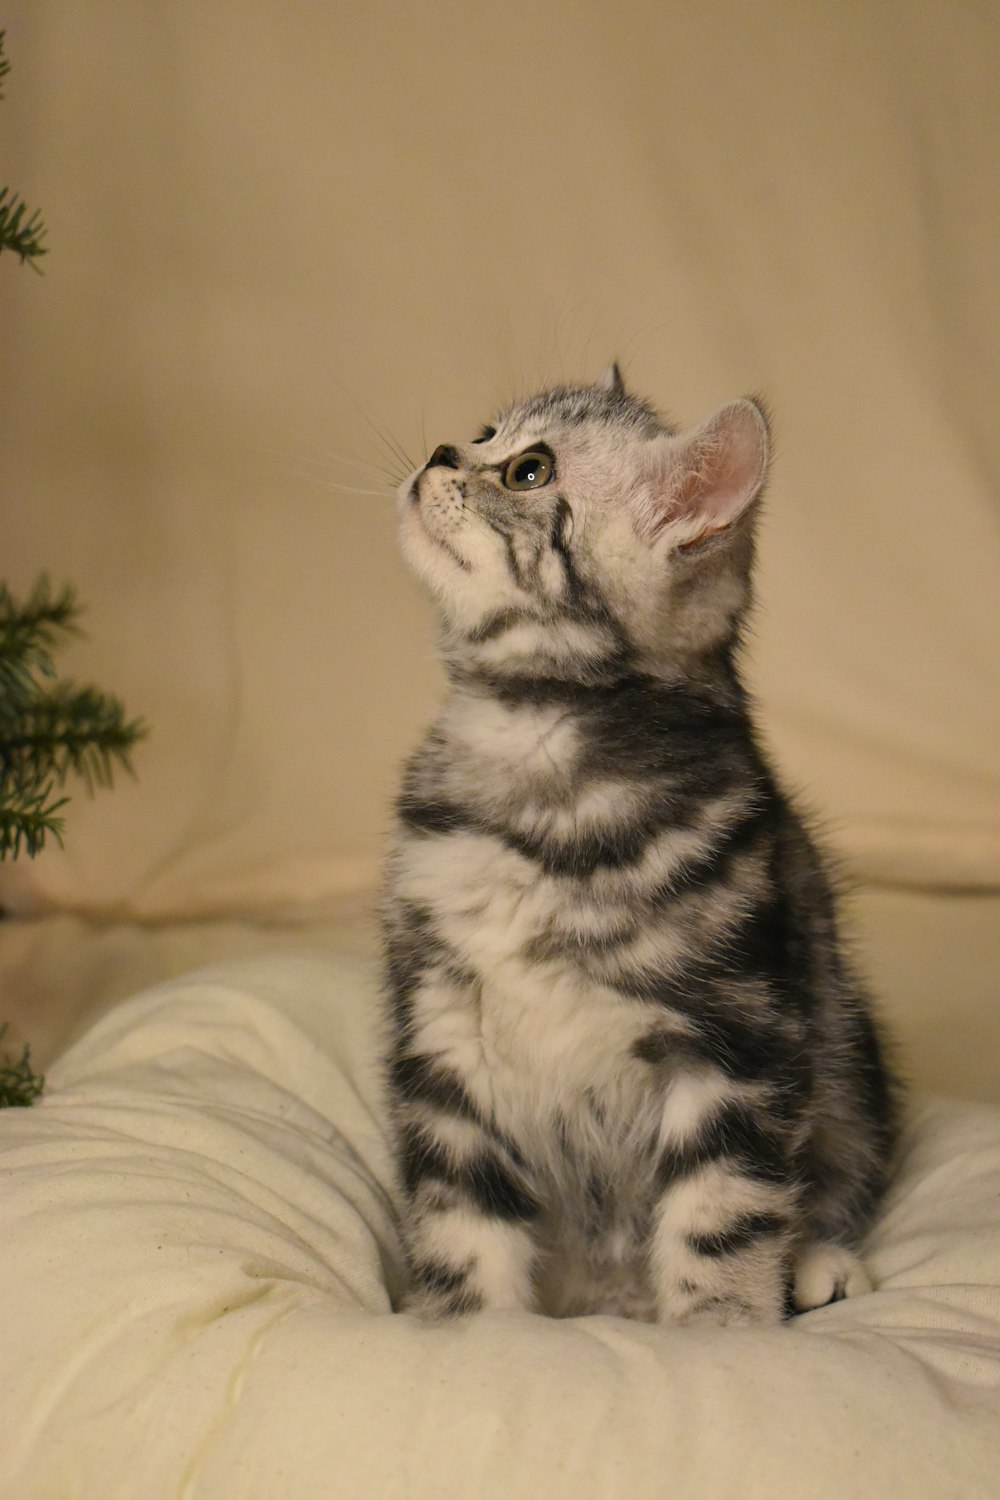 a kitten sitting on a pillow looking up